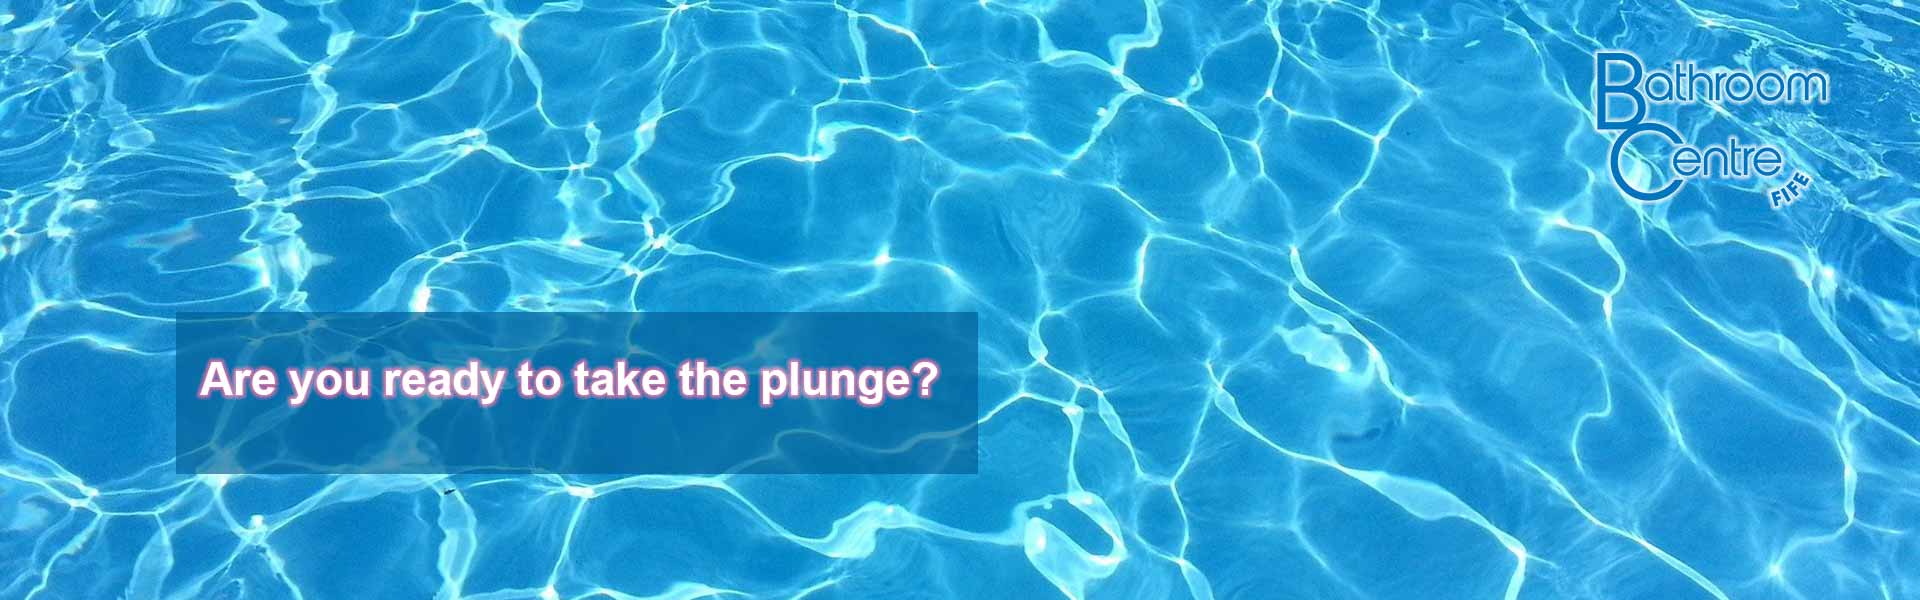 BC-plunge-into-pool